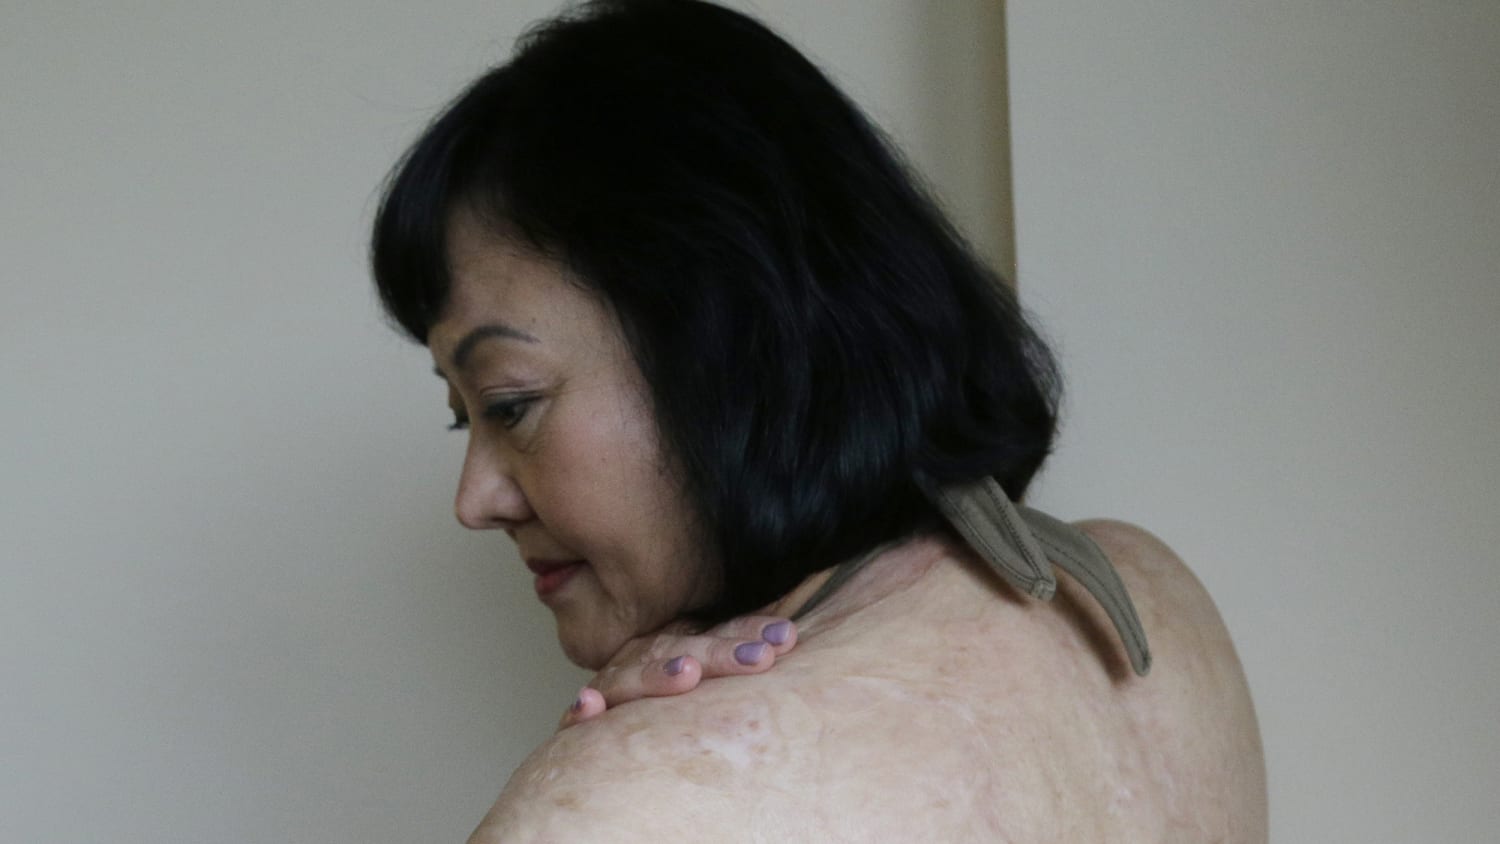 Refreshing News: Napalm Girl Receives Laser Surgery To 